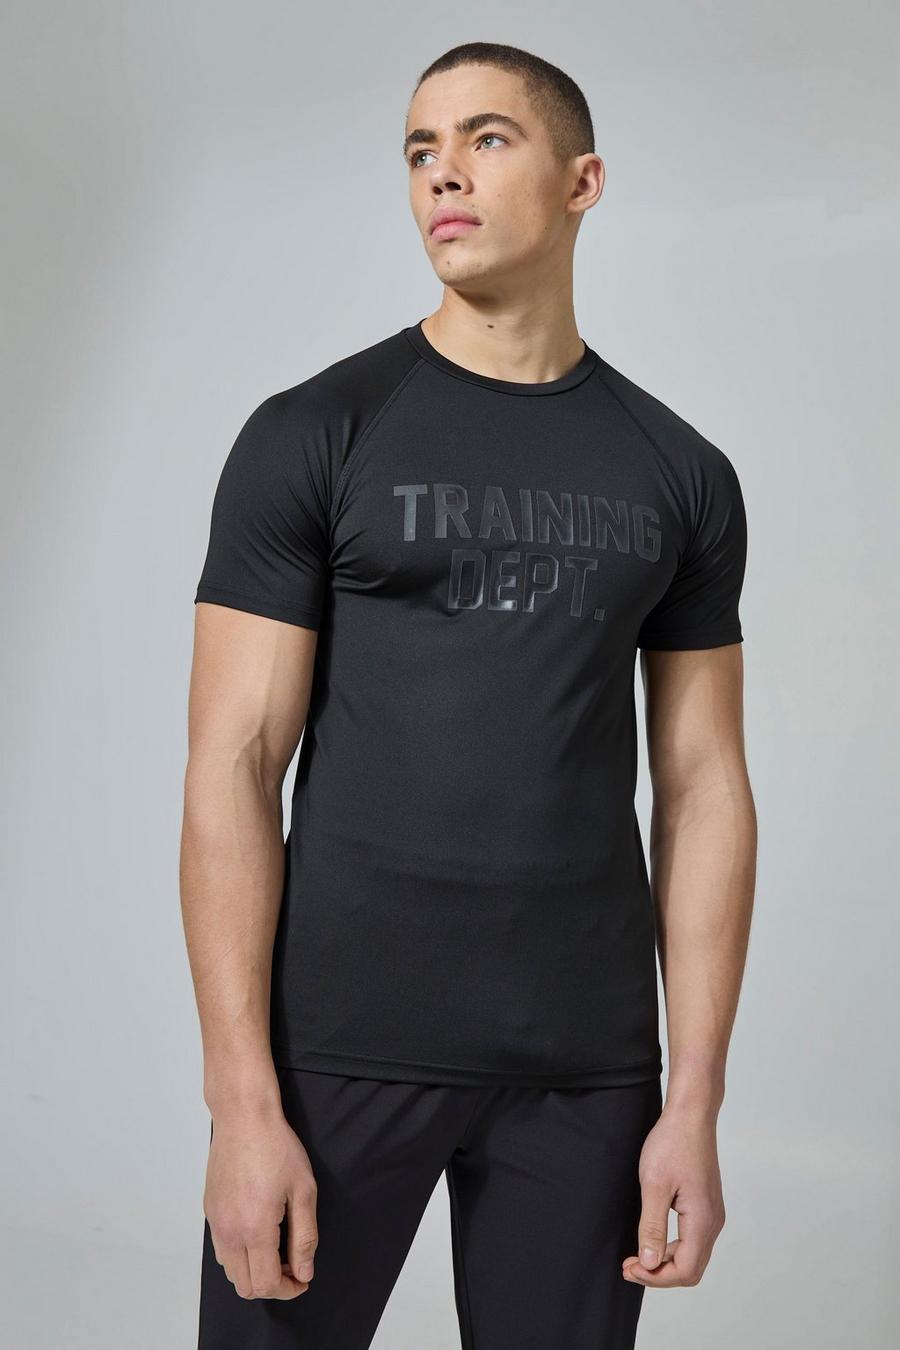 Active Trainings Dept Muscle-Fit T-Shirt, Black image number 1